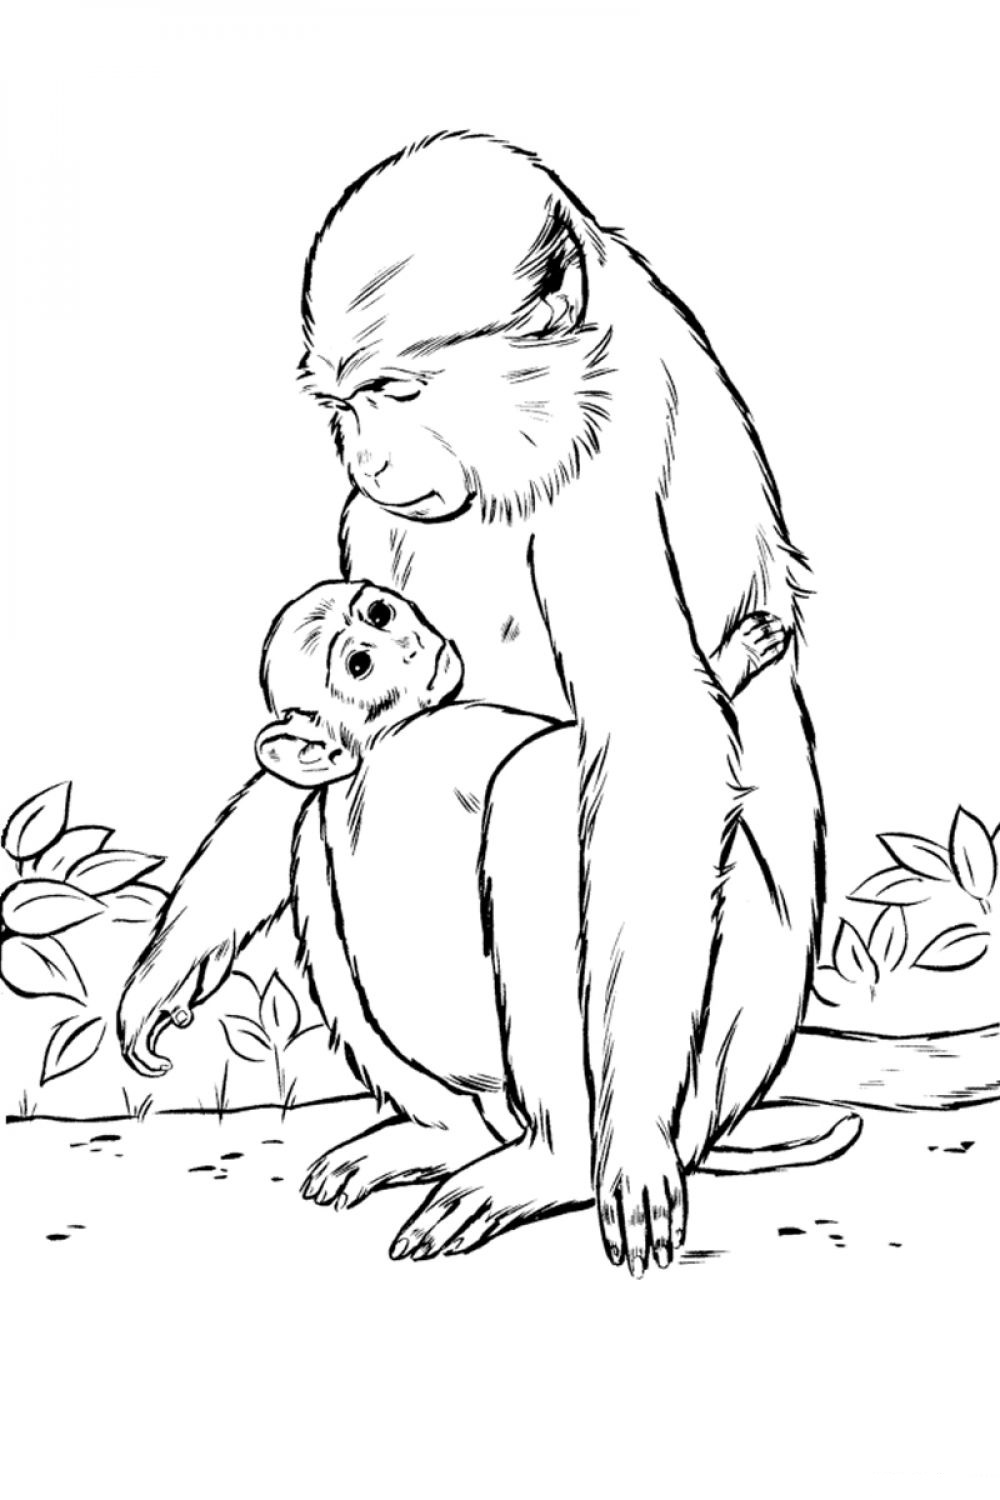 Drawing of a monkey hugging its
  mother